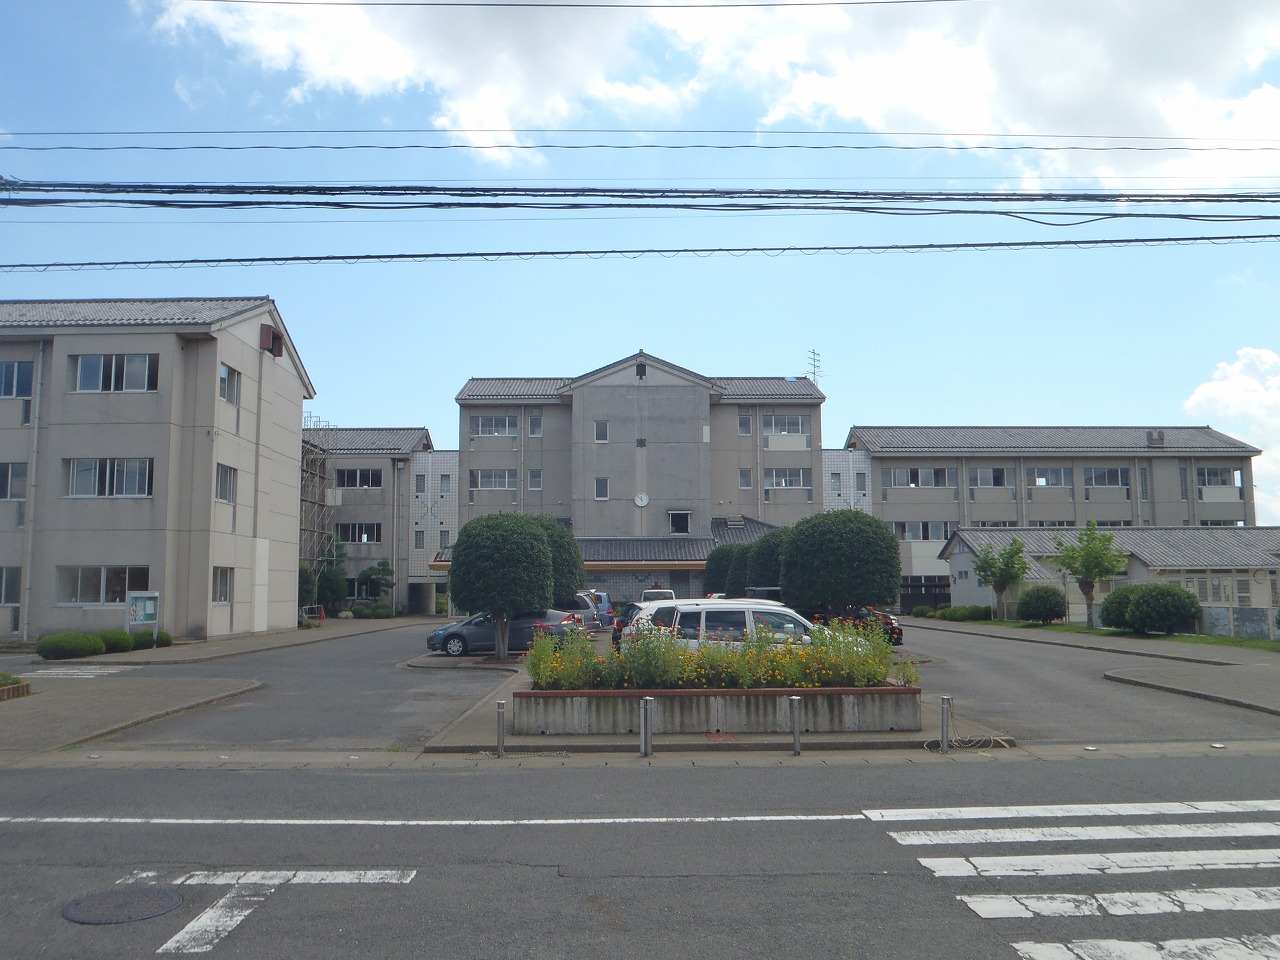 Primary school. Hitachinaka 1330m to stand outfield elementary school (elementary school)